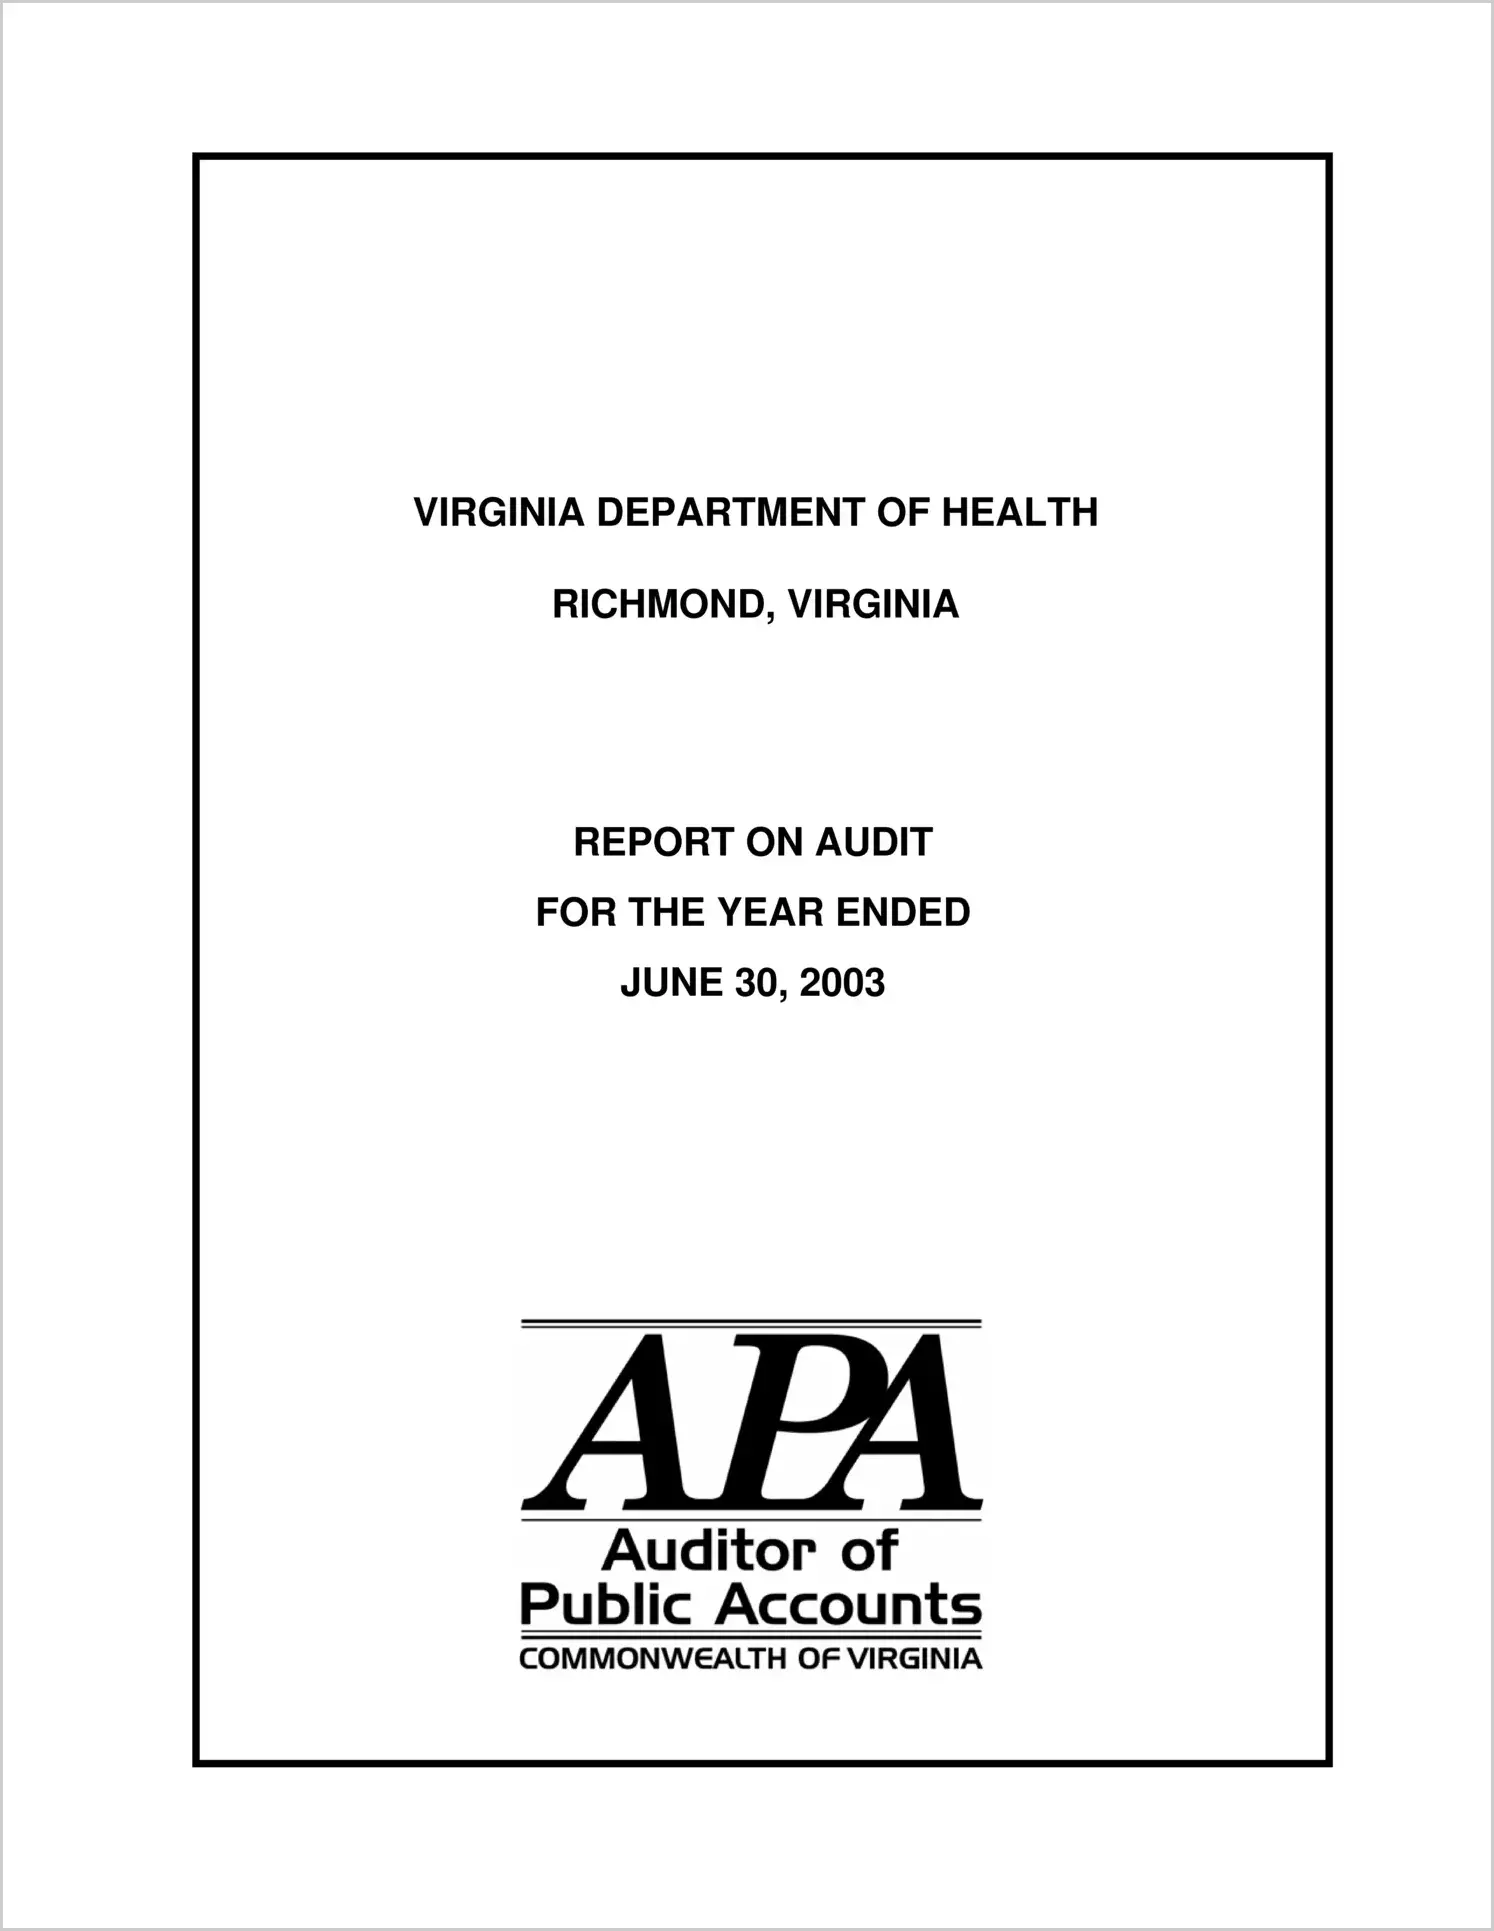 Department of Health for the year ended June 30, 2003